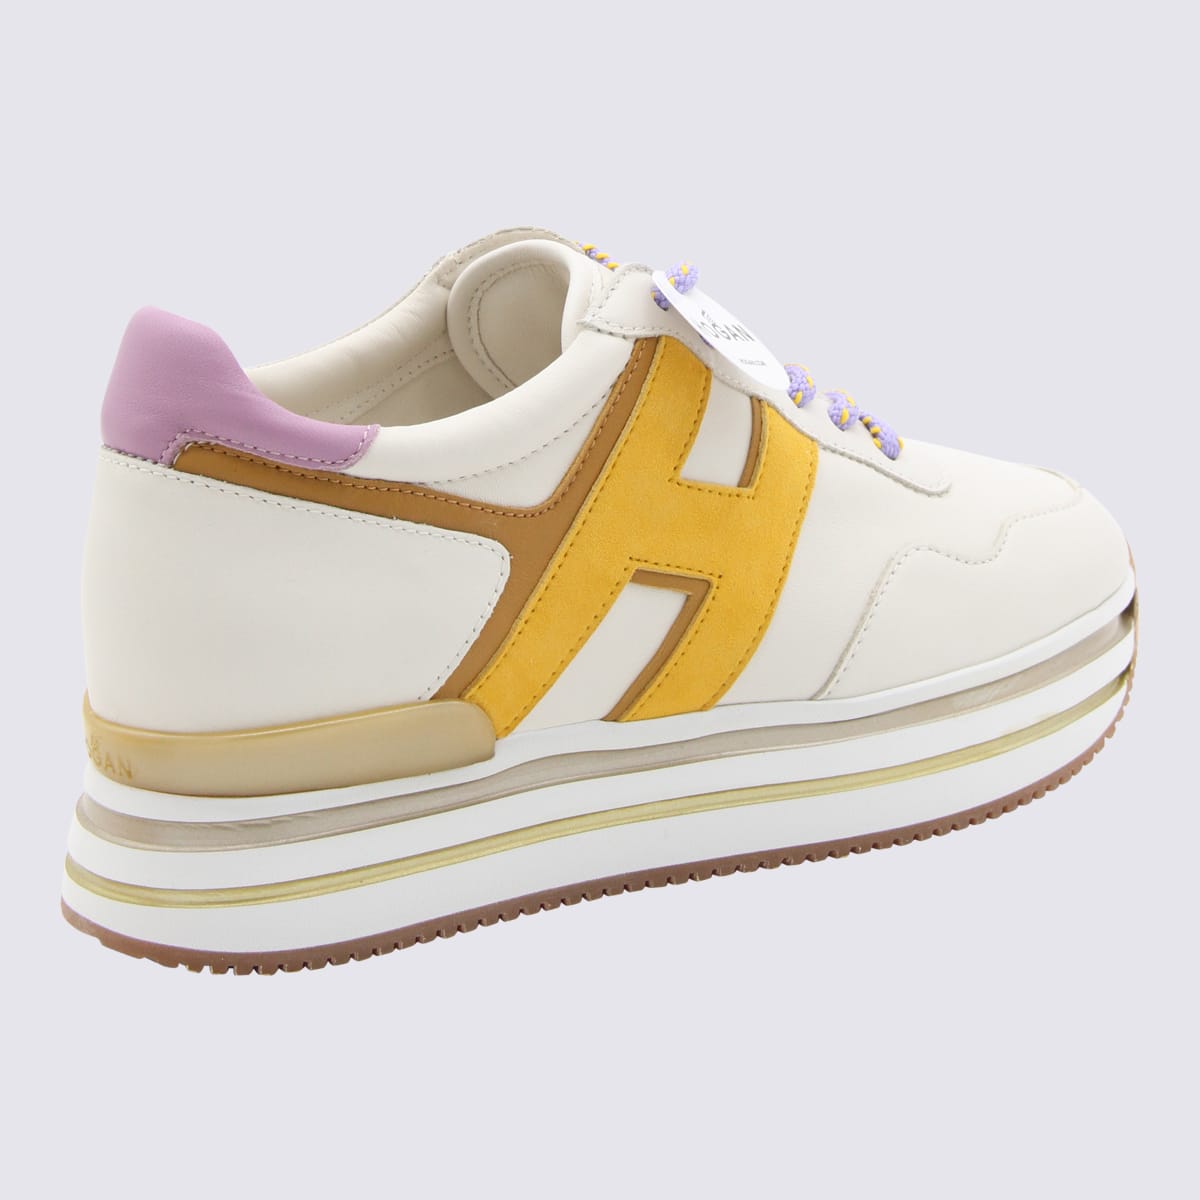 Shop Hogan Yellow And White Leather Sneakers